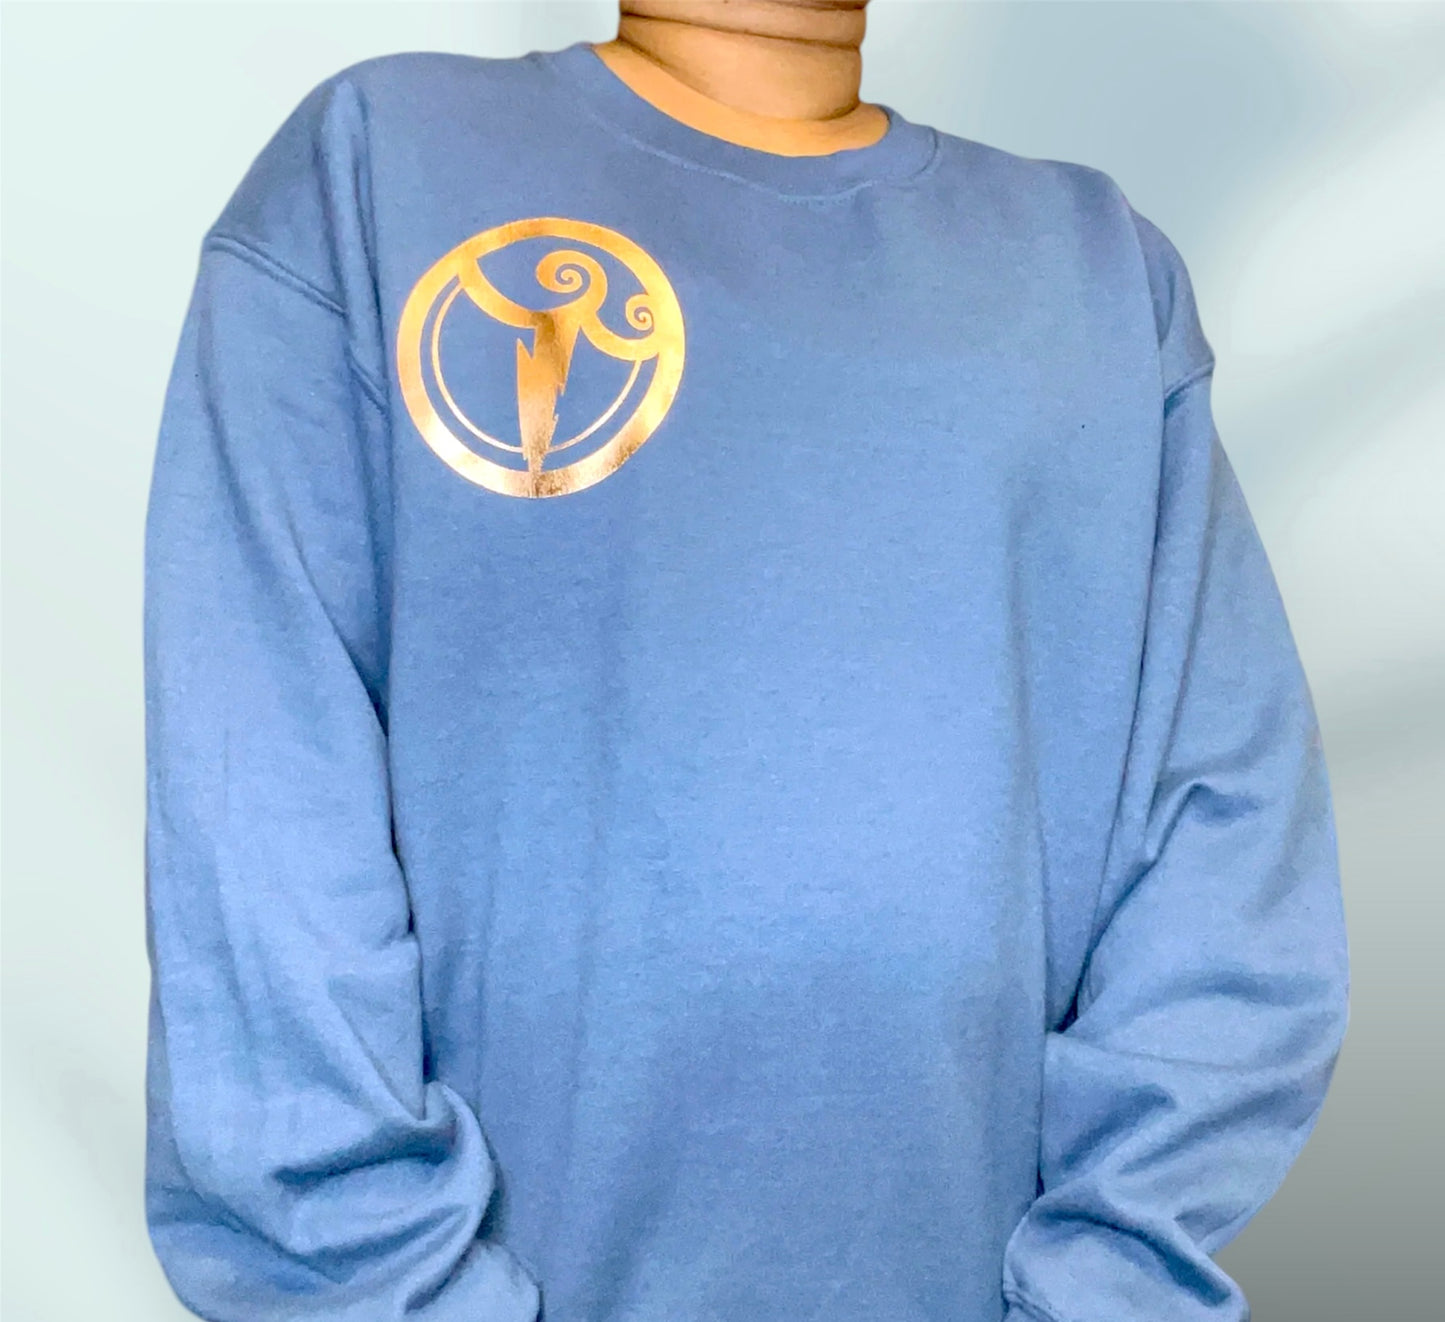 Hercules and Hades Logo Unisex Pullover Sweater - Comfy Cotton Stretch Crew Neck Sweatshirt